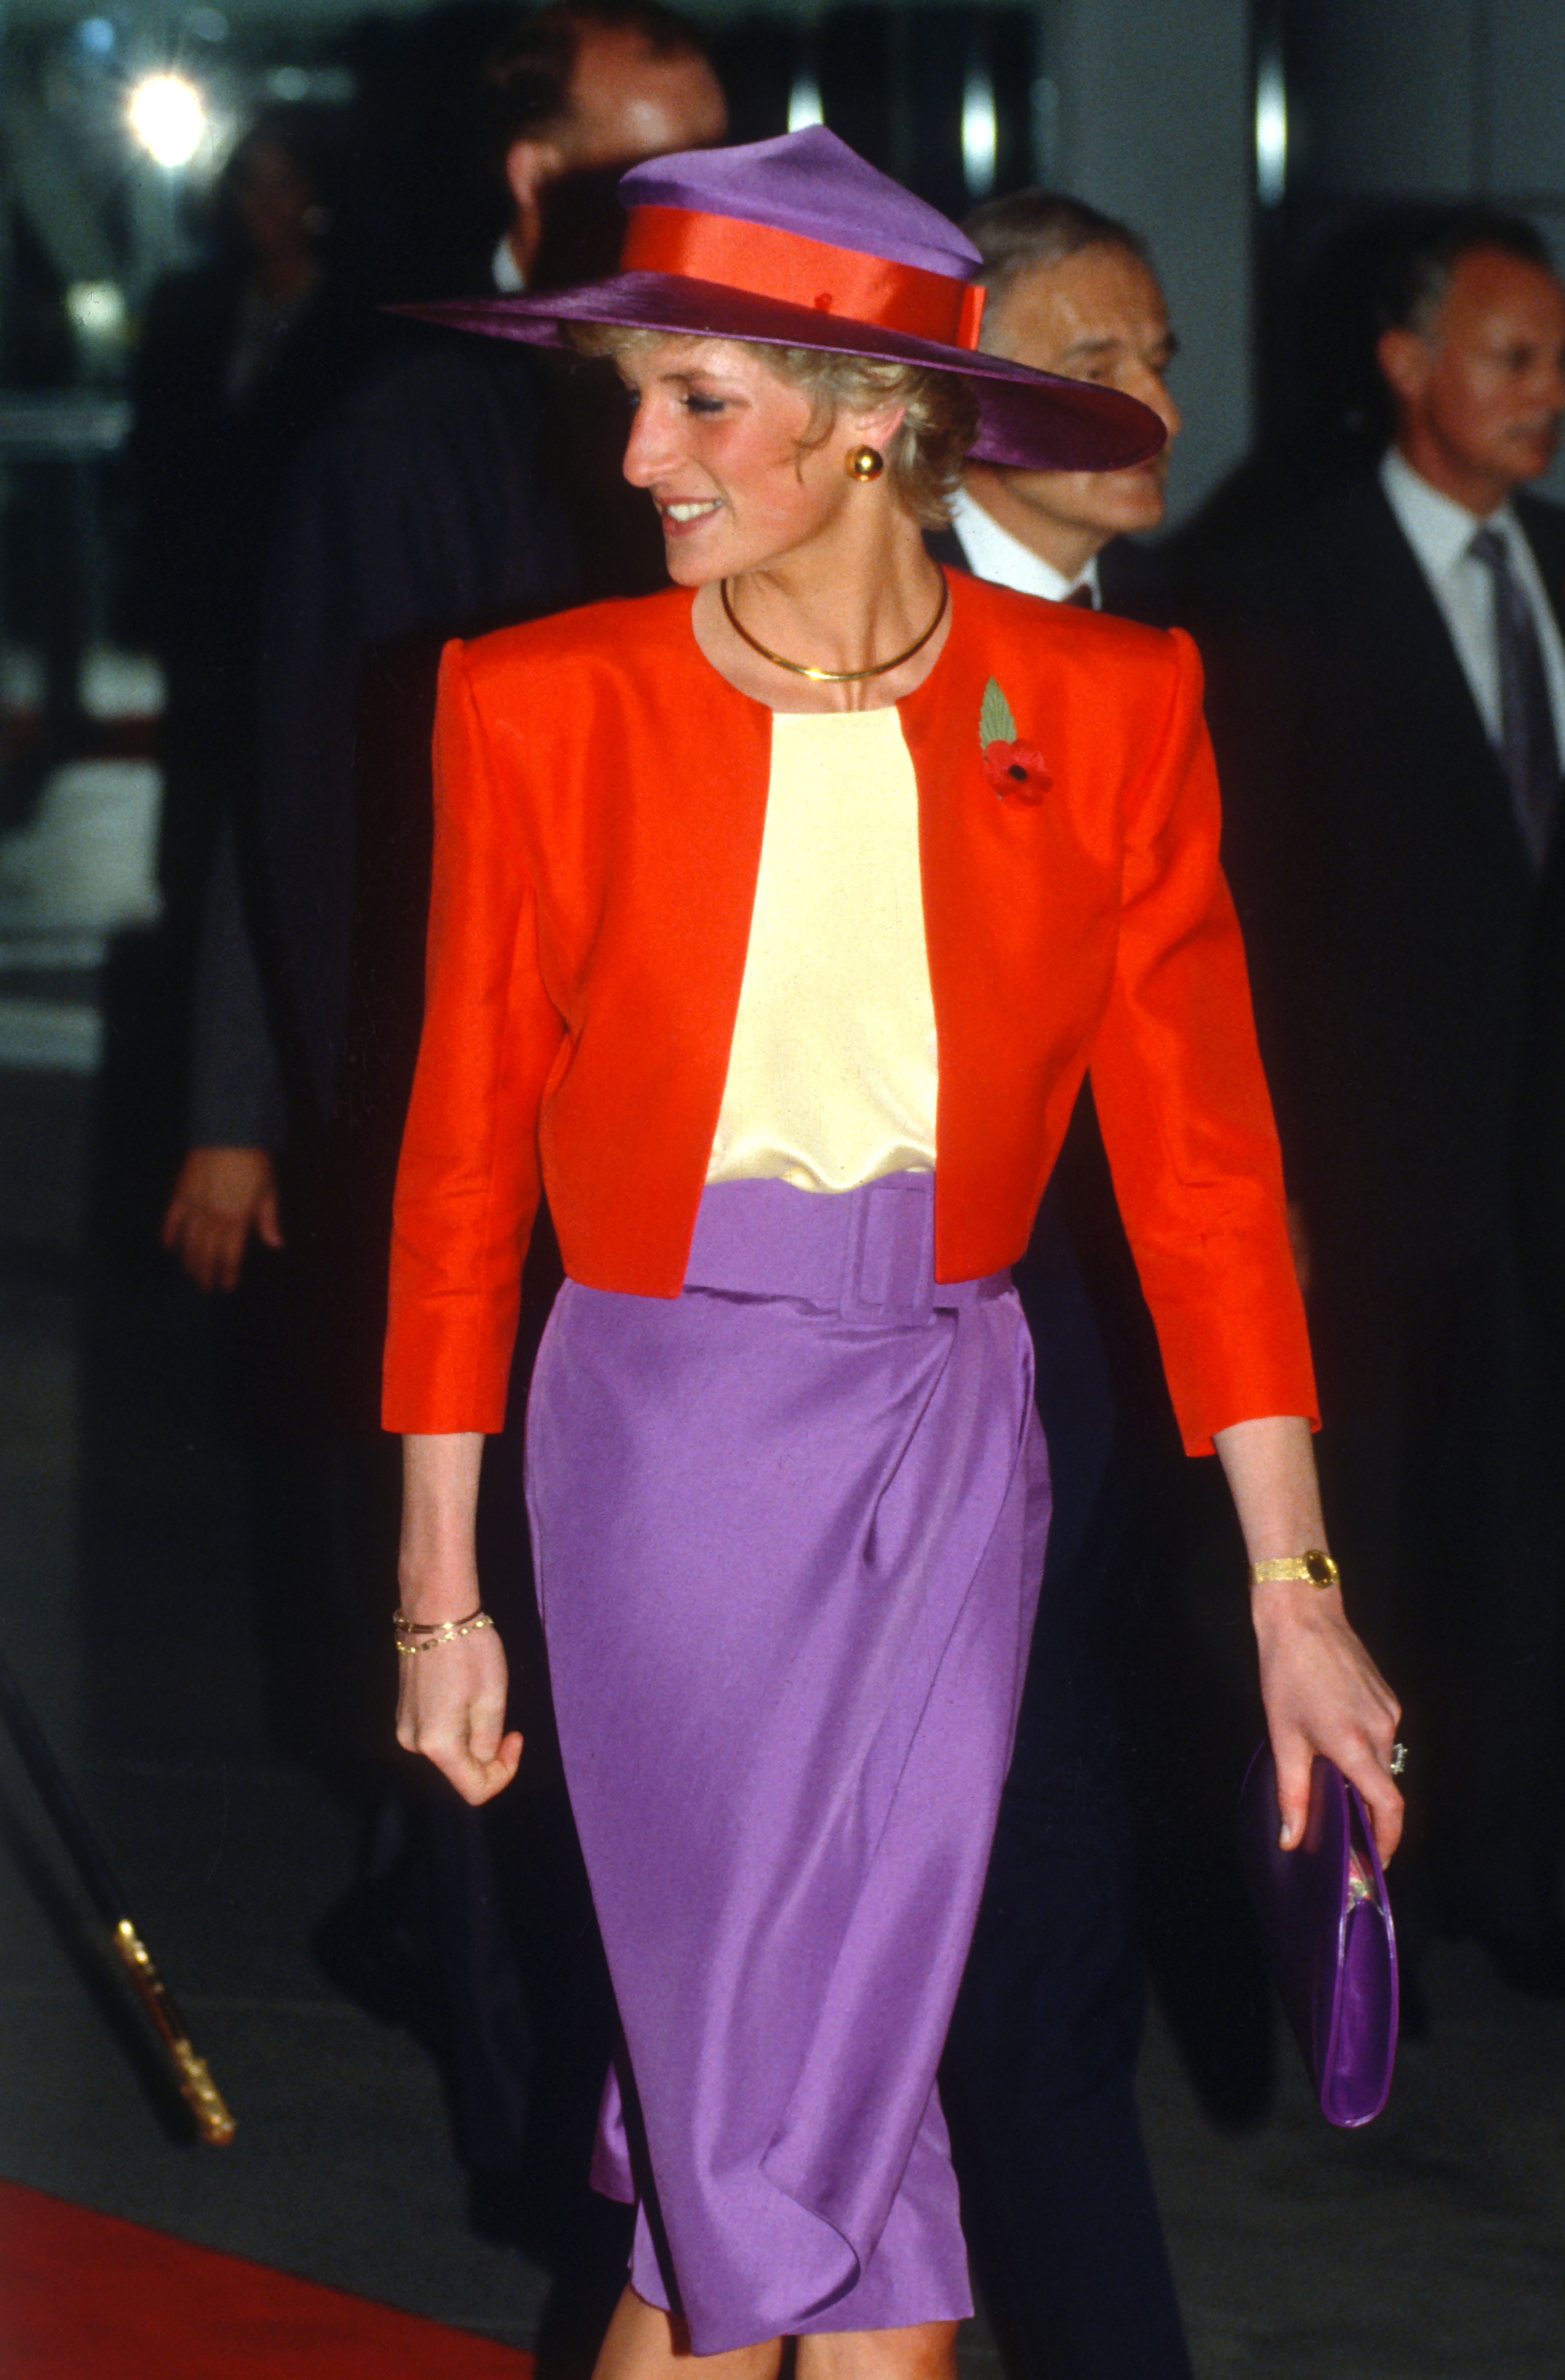 Princess Diana during the Governor's launch on November 7, 1989, in Hong Kong, China. | Source: Getty Images